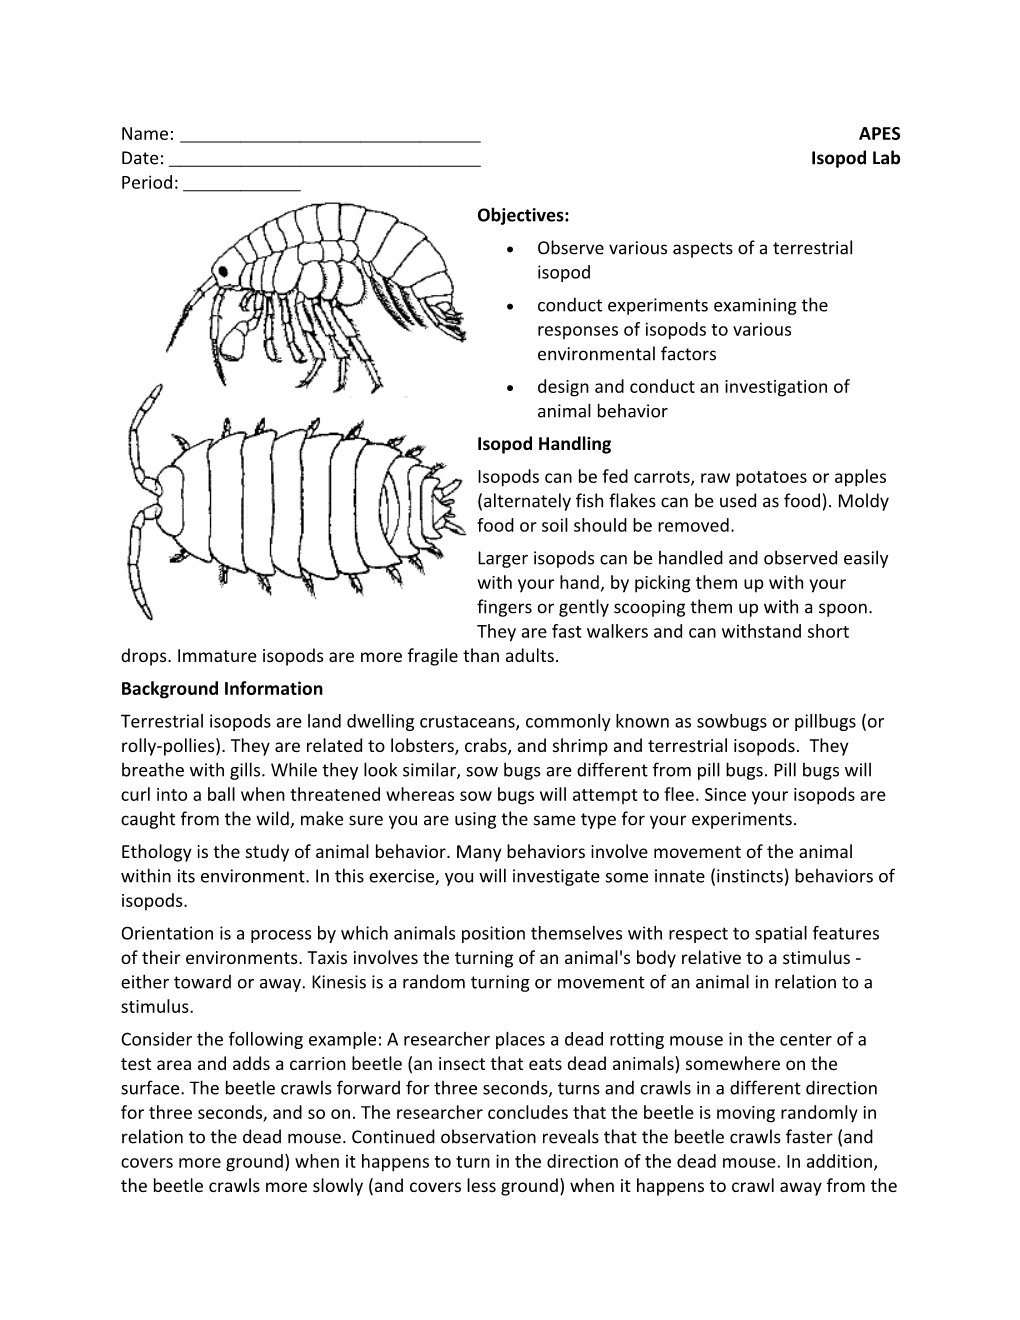 Observe Various Aspects of a Terrestrial Isopod s1